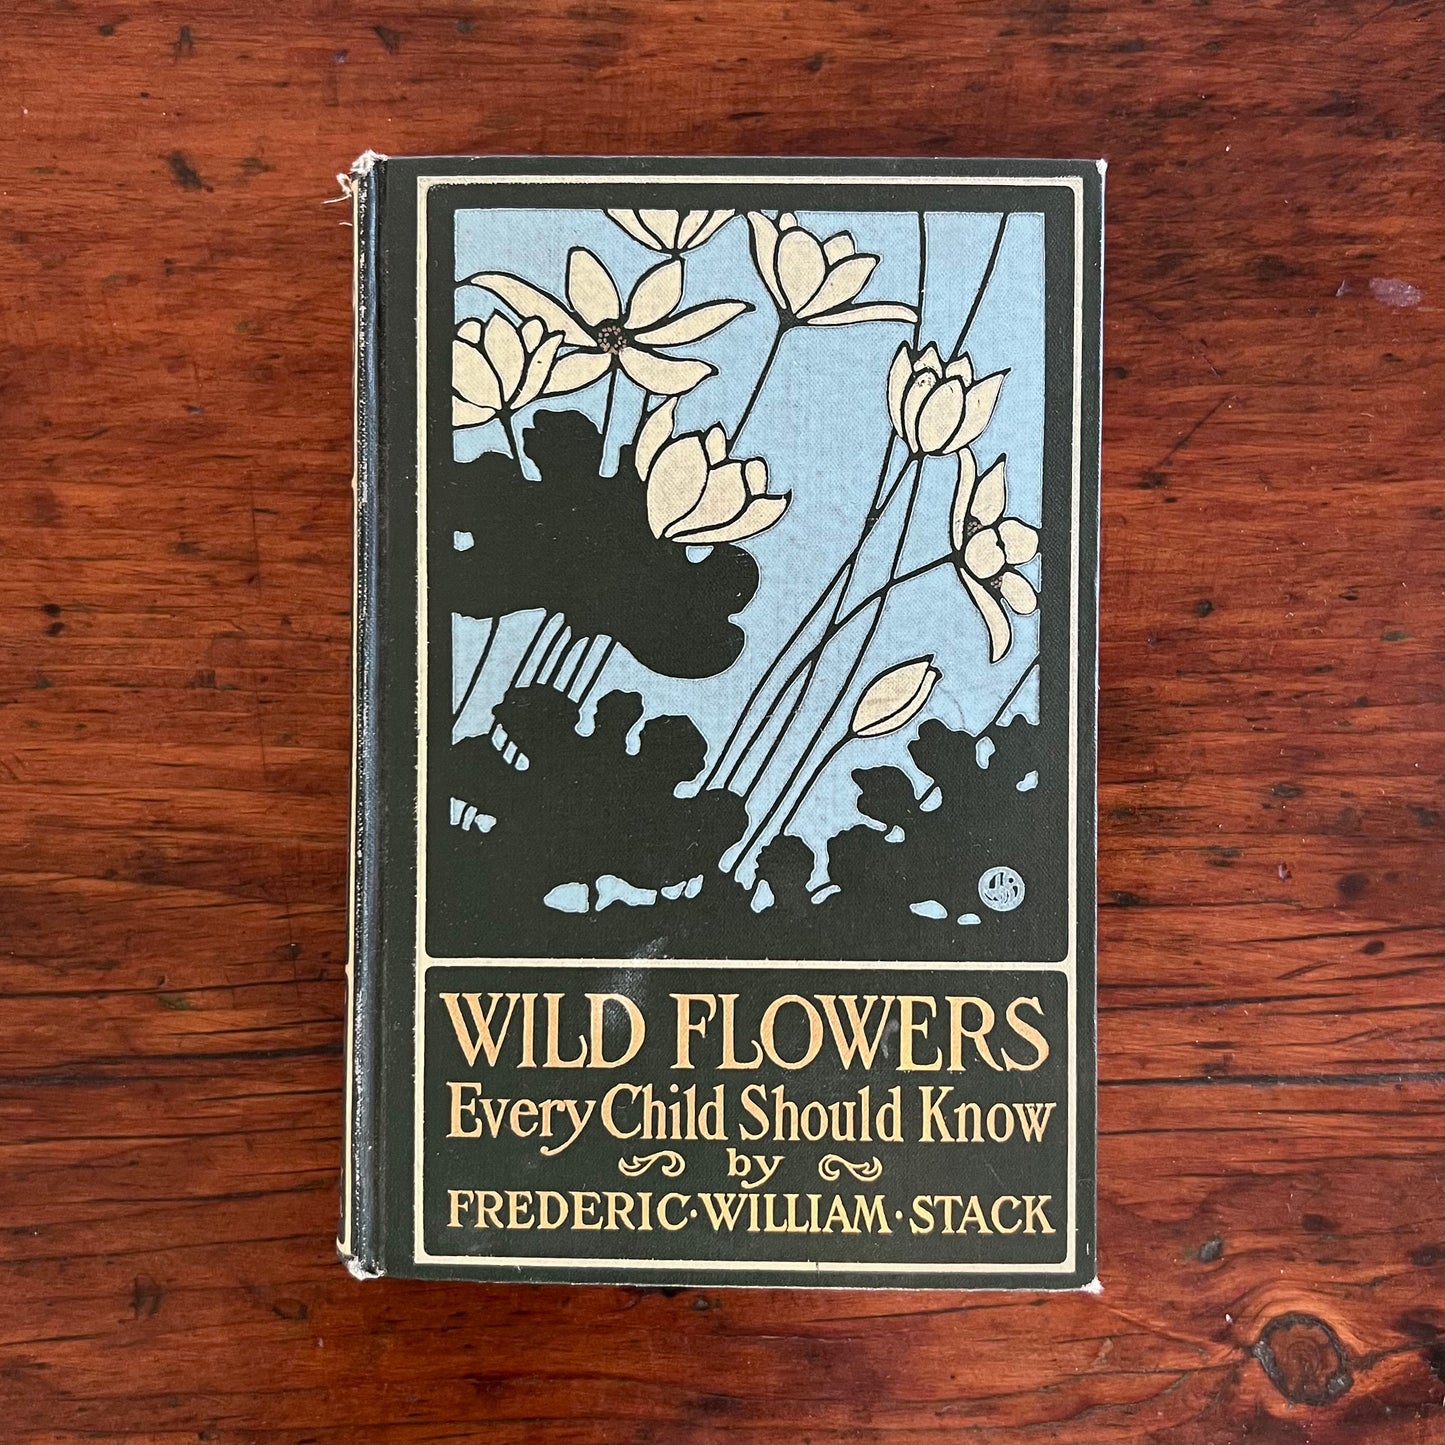 Wild Flowers Every Child Should Know 1st Ed. By Frederic William Stack